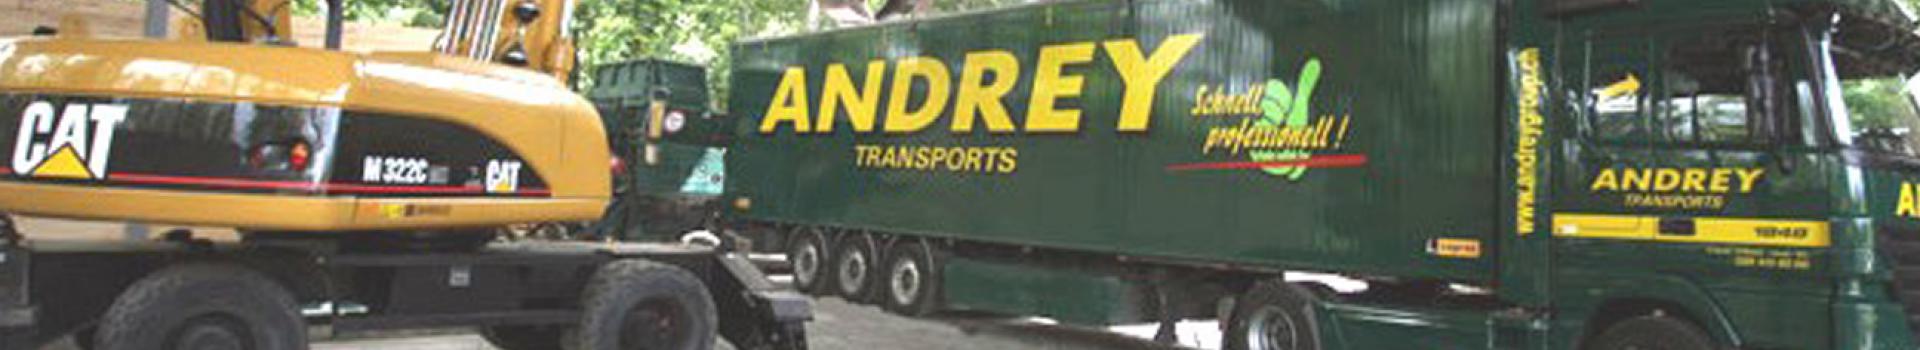 Recyclage andrey group